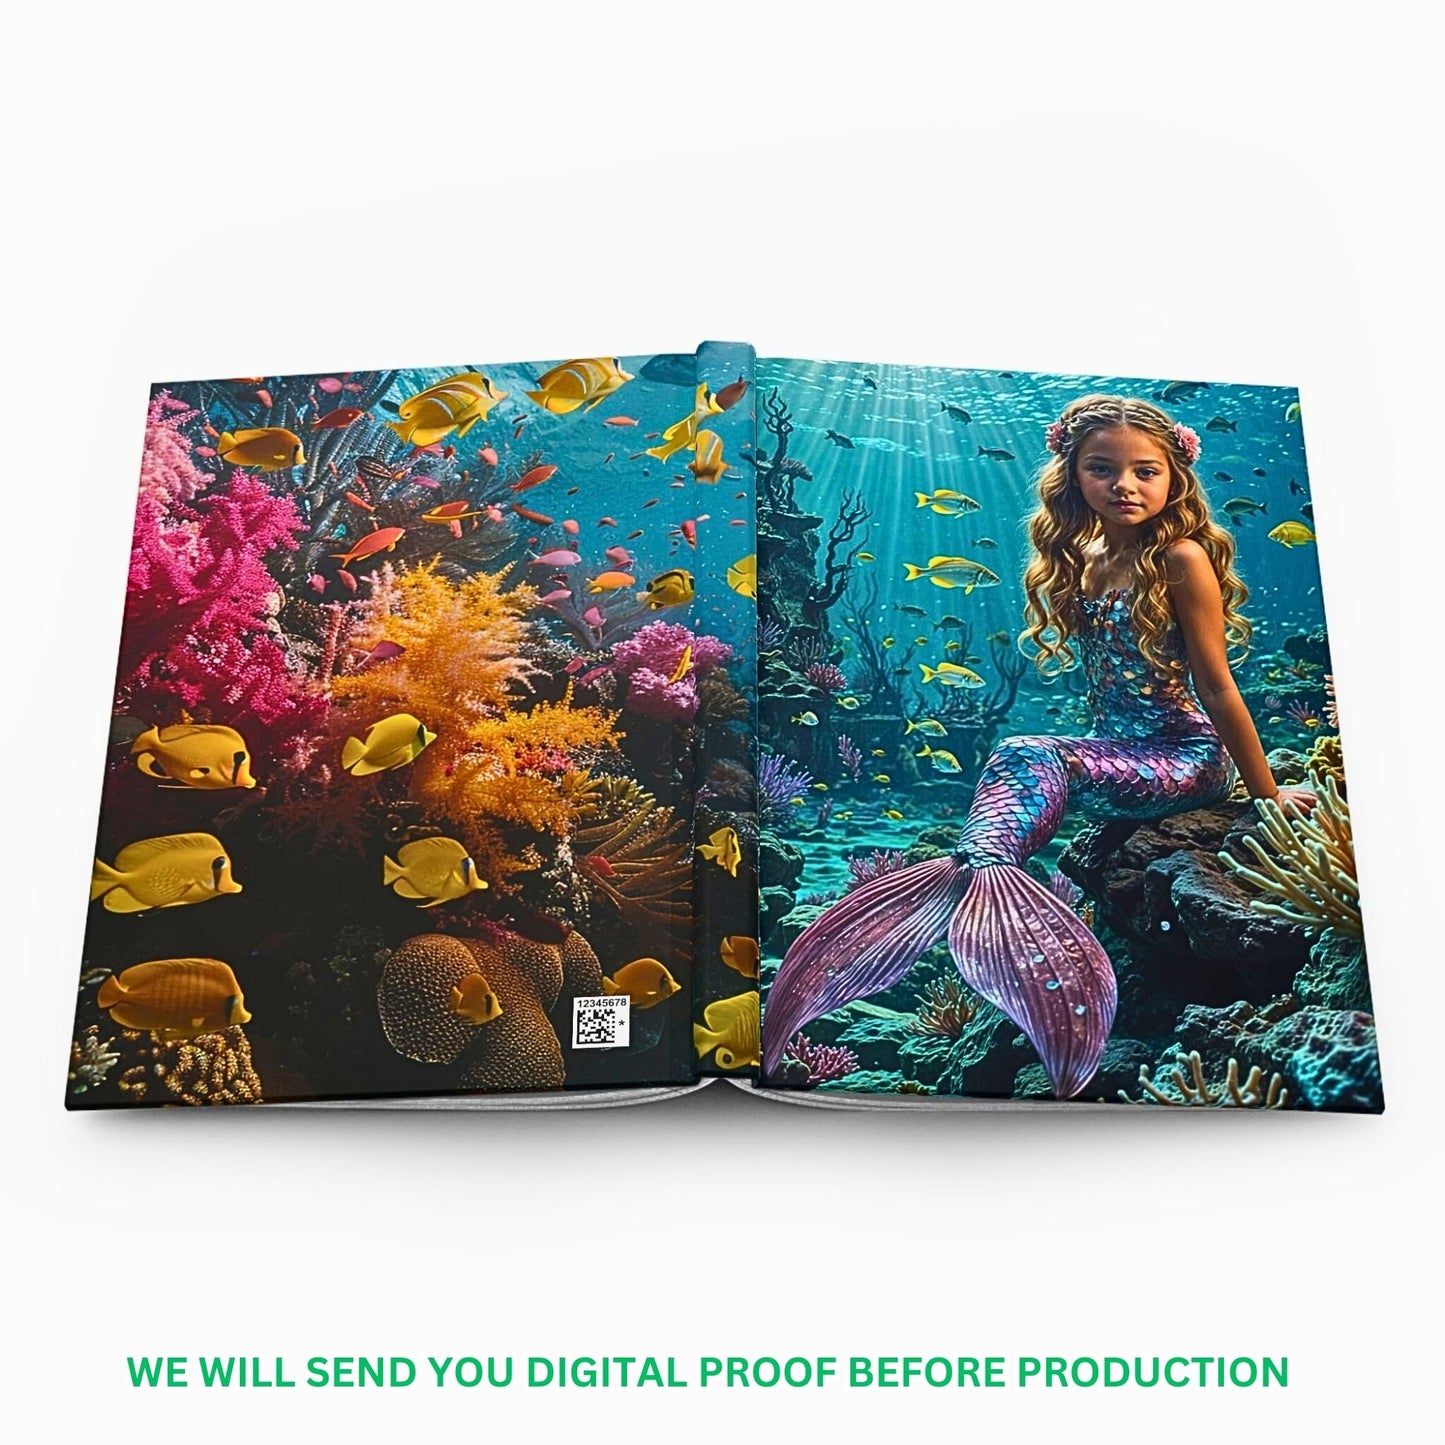 Explore the depths of imagination with our Custom Mermaid Journal, personalized from a cherished photo. Ideal for birthdays, this unique gift for girls blends creativity with practicality, perfect for documenting dreams and adventures.